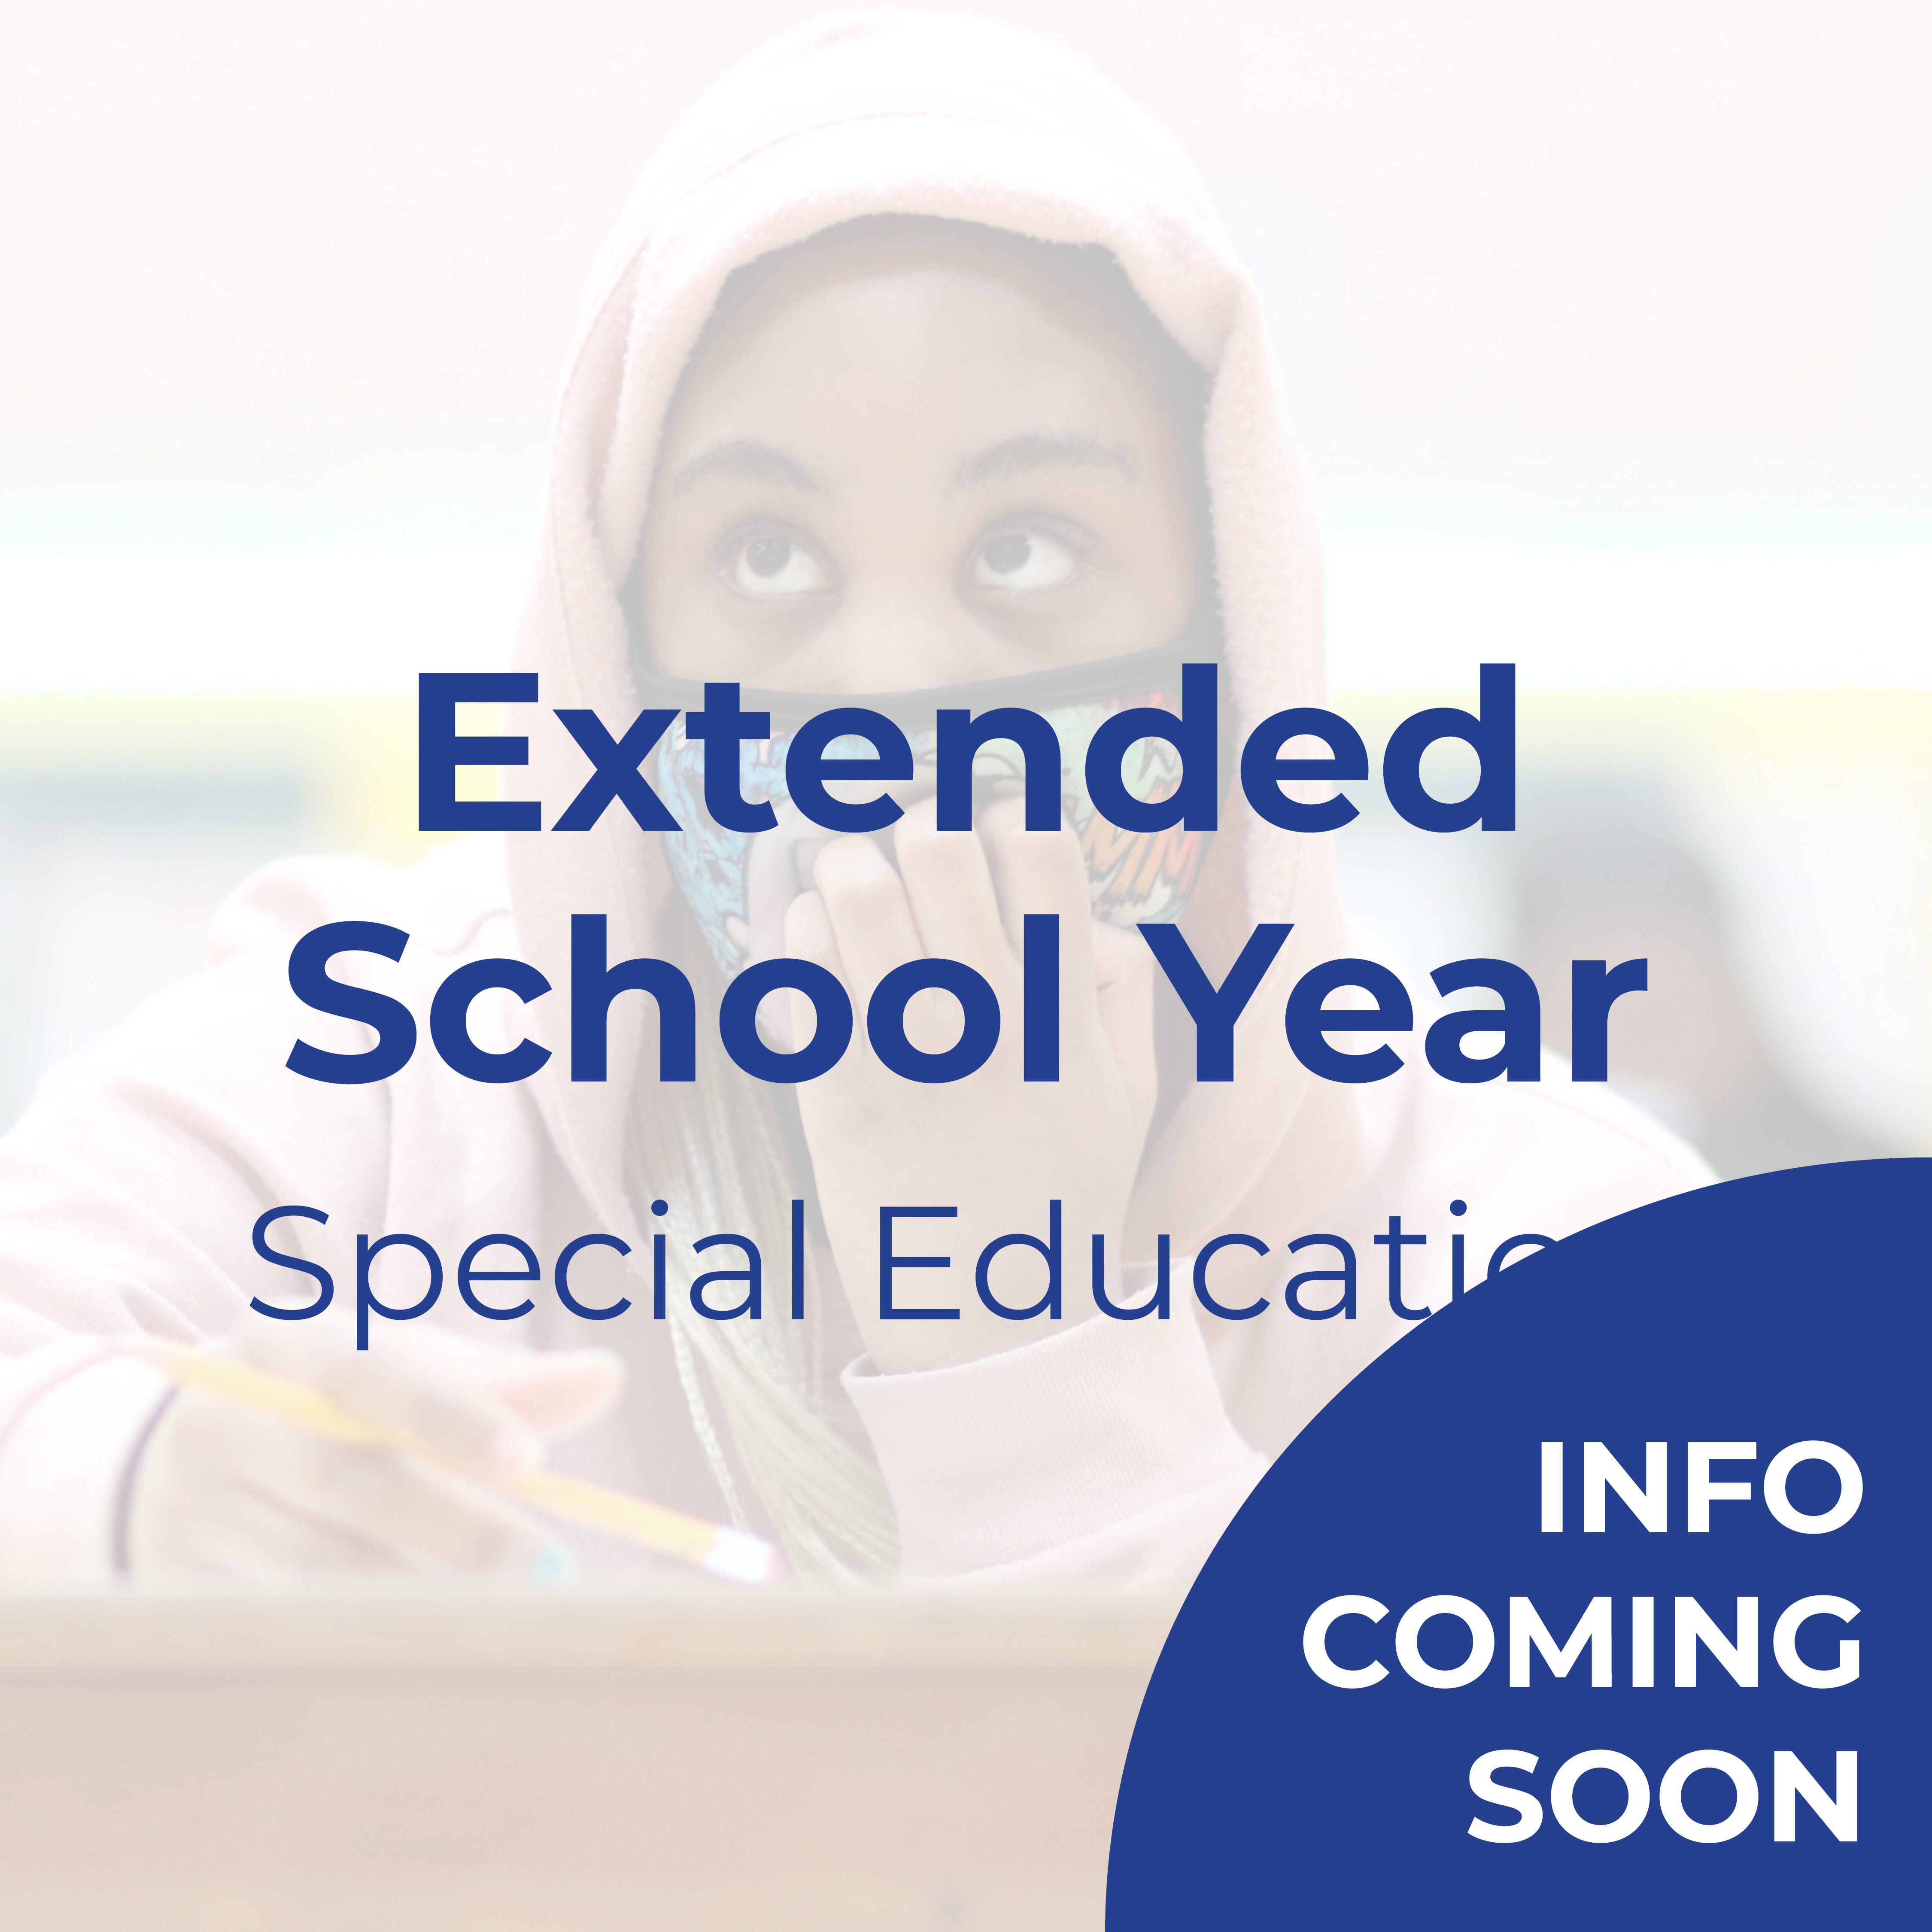 Text that reads "Extended School Year: Special Education"